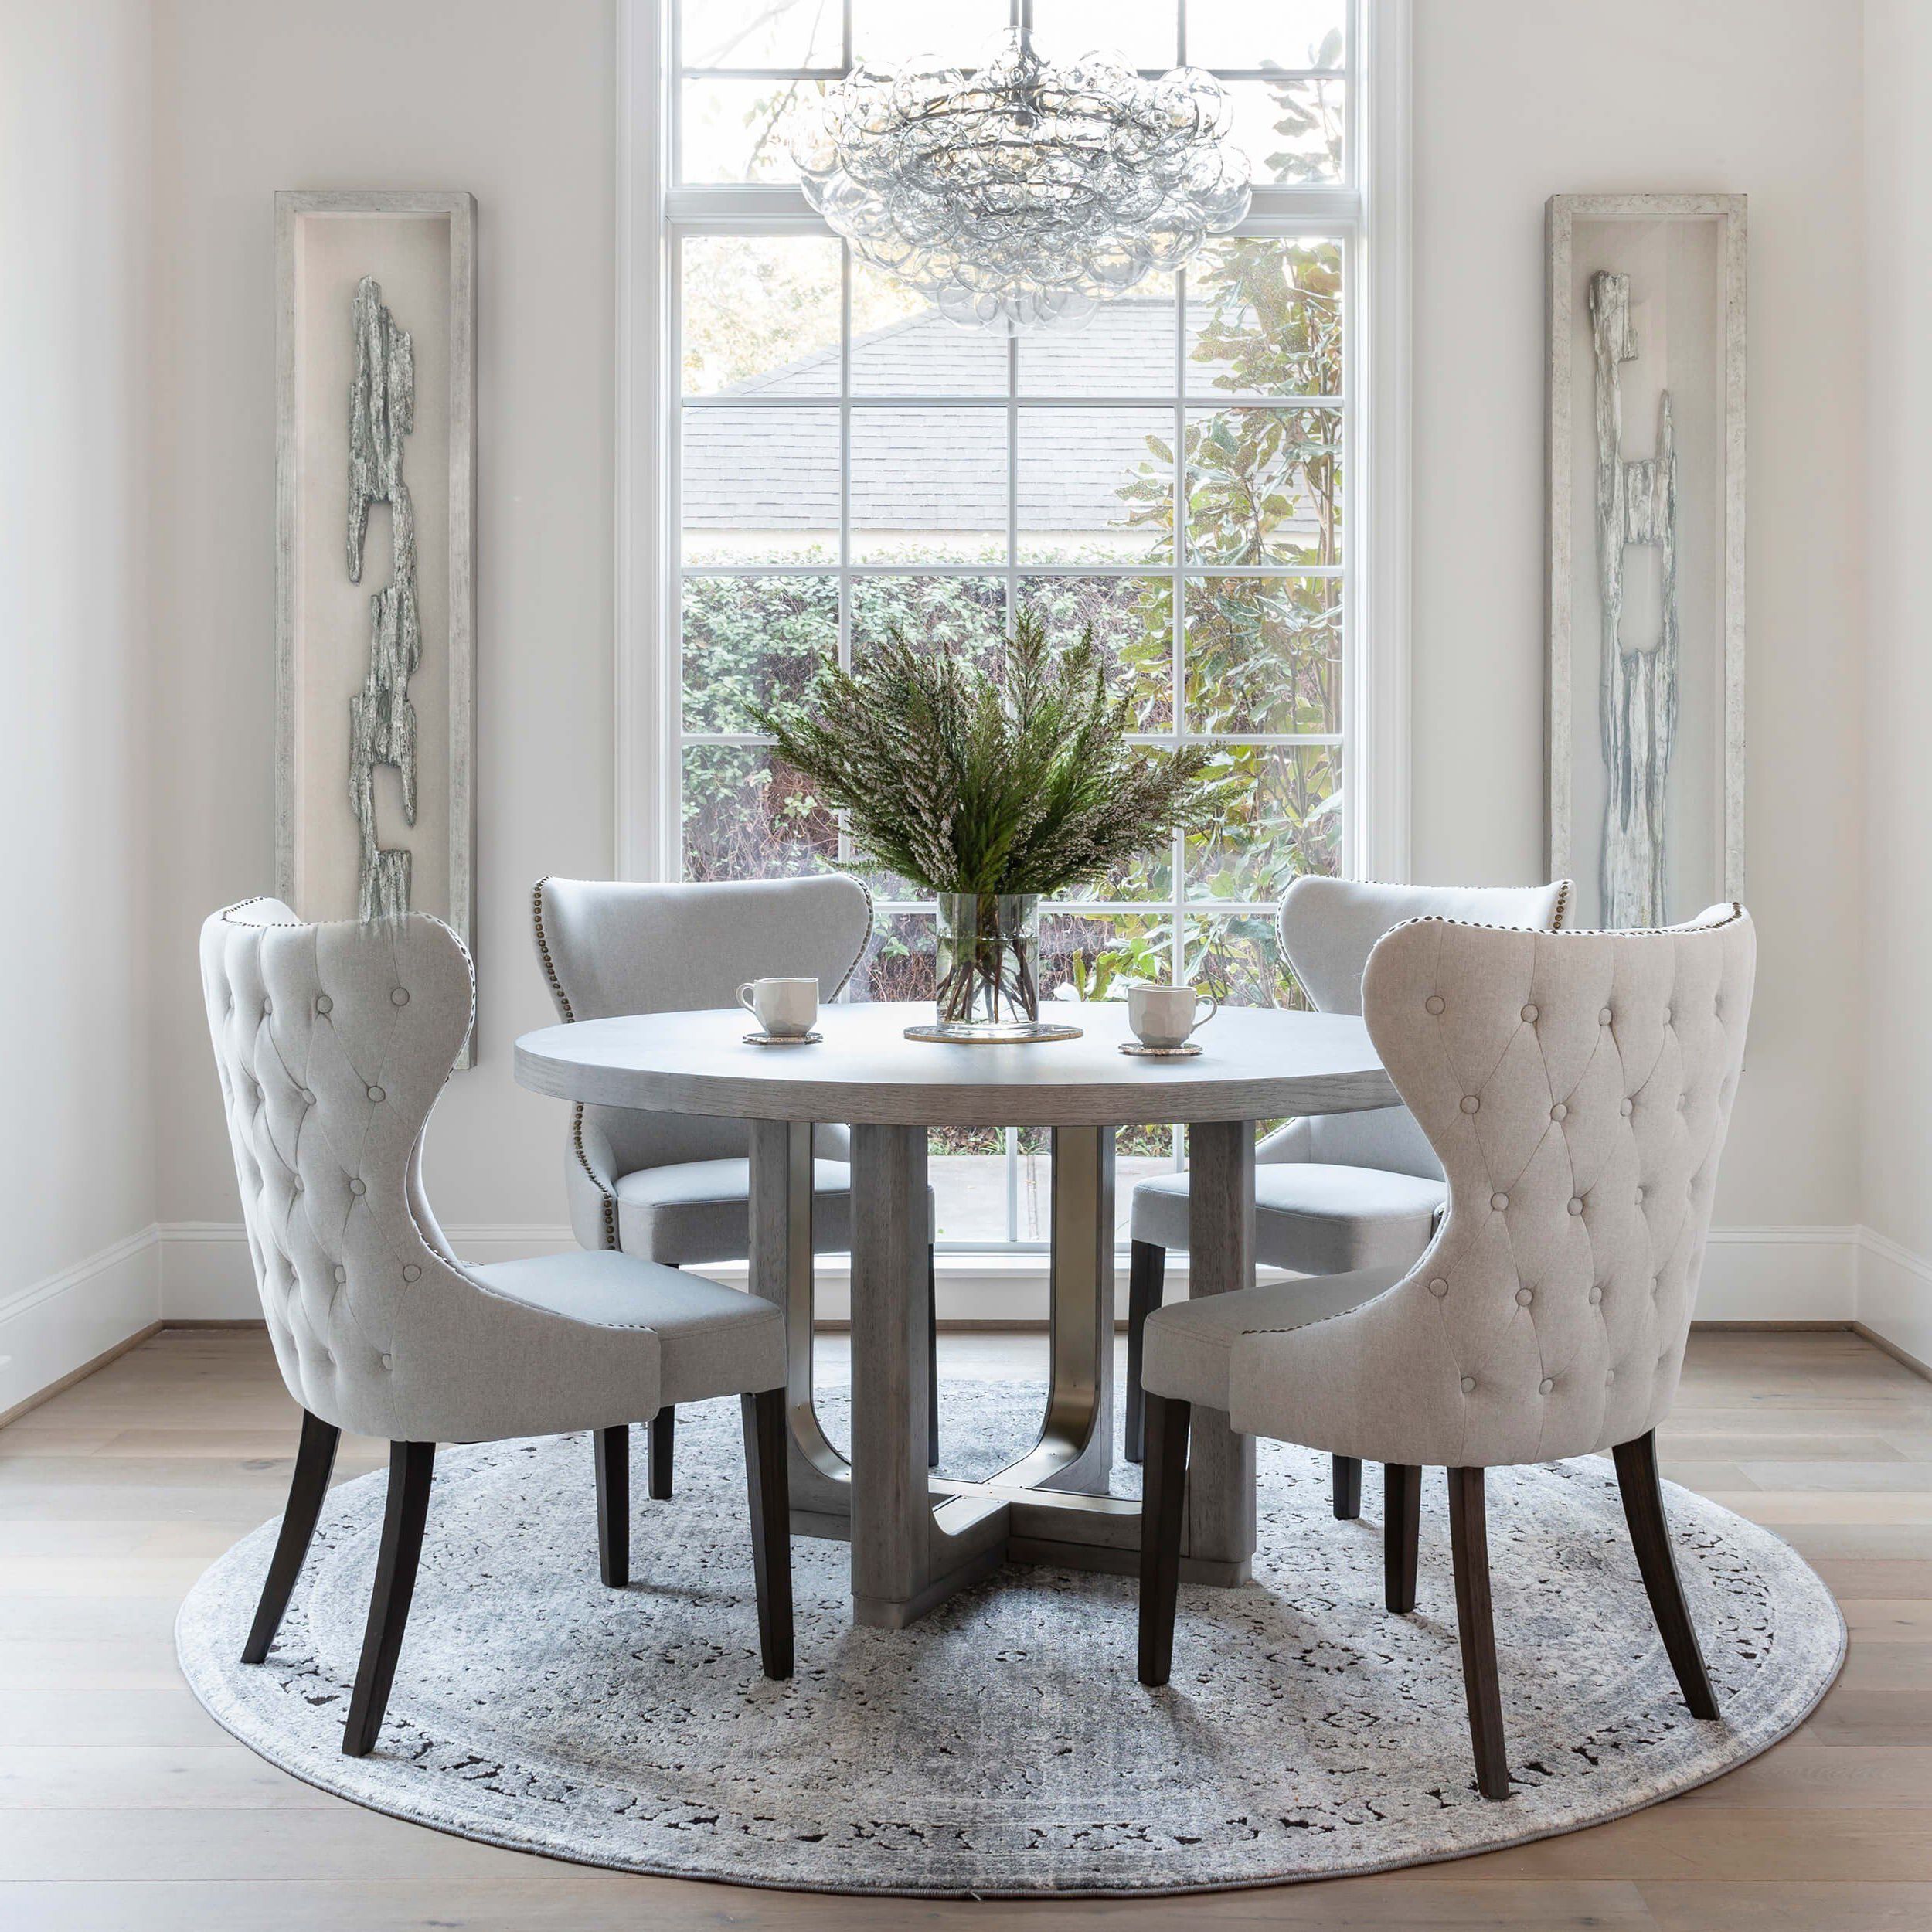 Top 30 of Elegance Small Round Dining Tables